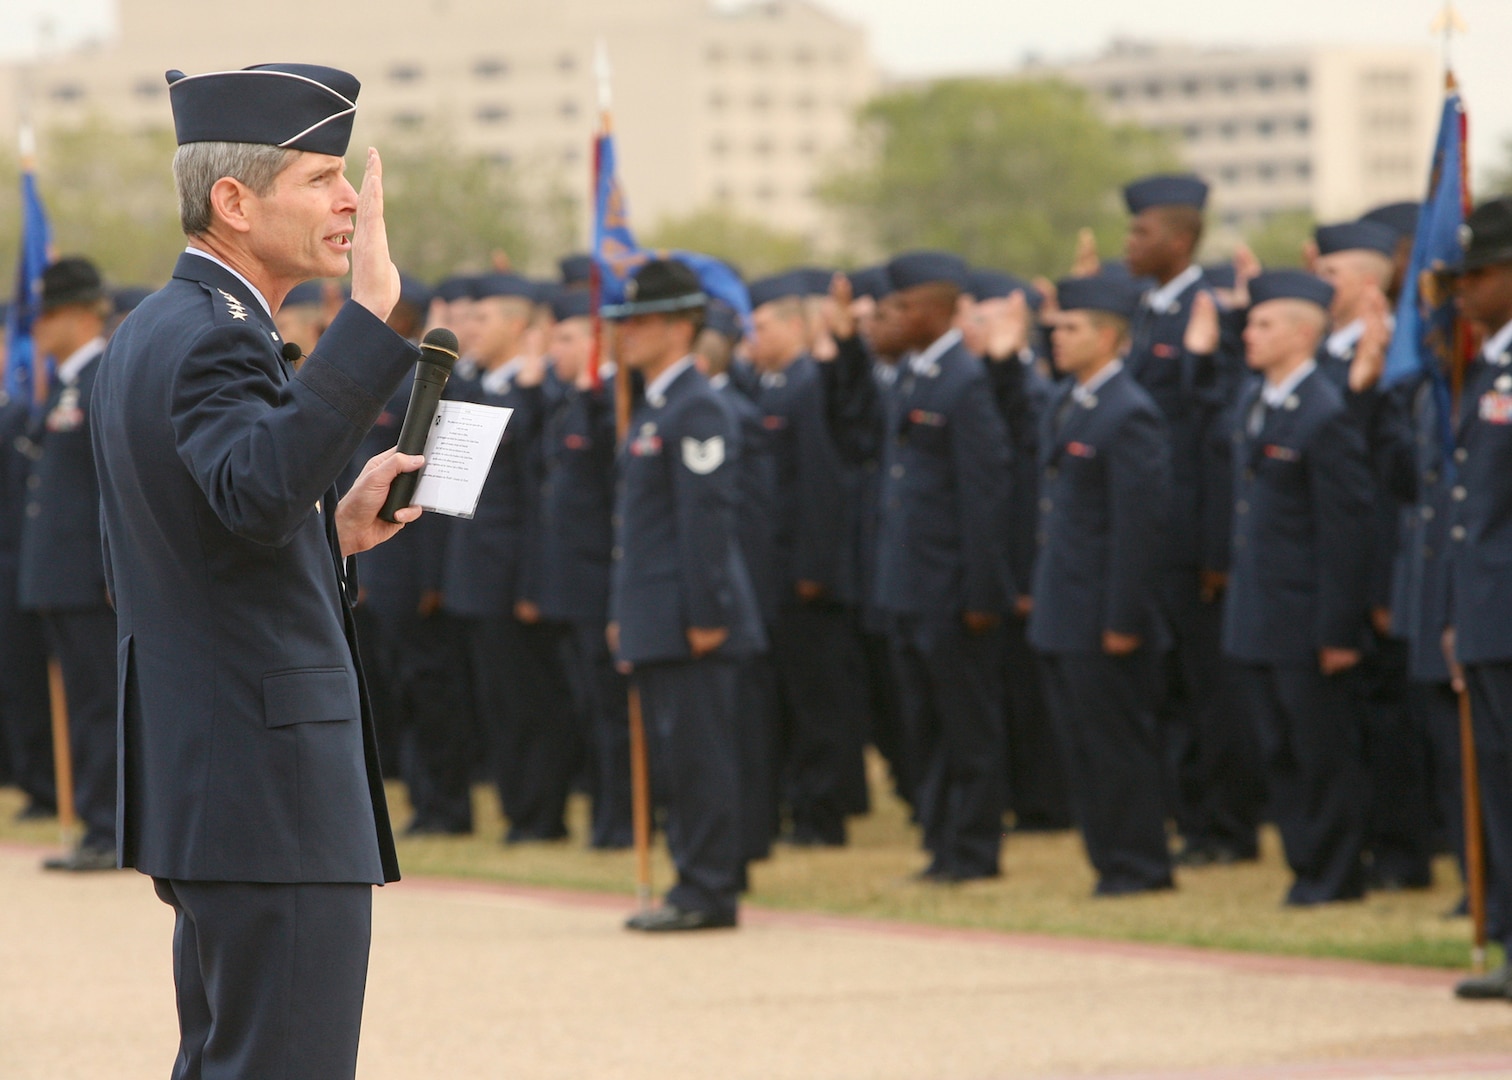 Air Force Chief of Staff Gen. Norton Schwartz administers the Oath of Enlistment to Air Force Basic Military Training graduates Oct. 31 at Lackland Air Force Base, Texas. (U.S. Air Force photo/Robbin Cresswell)  